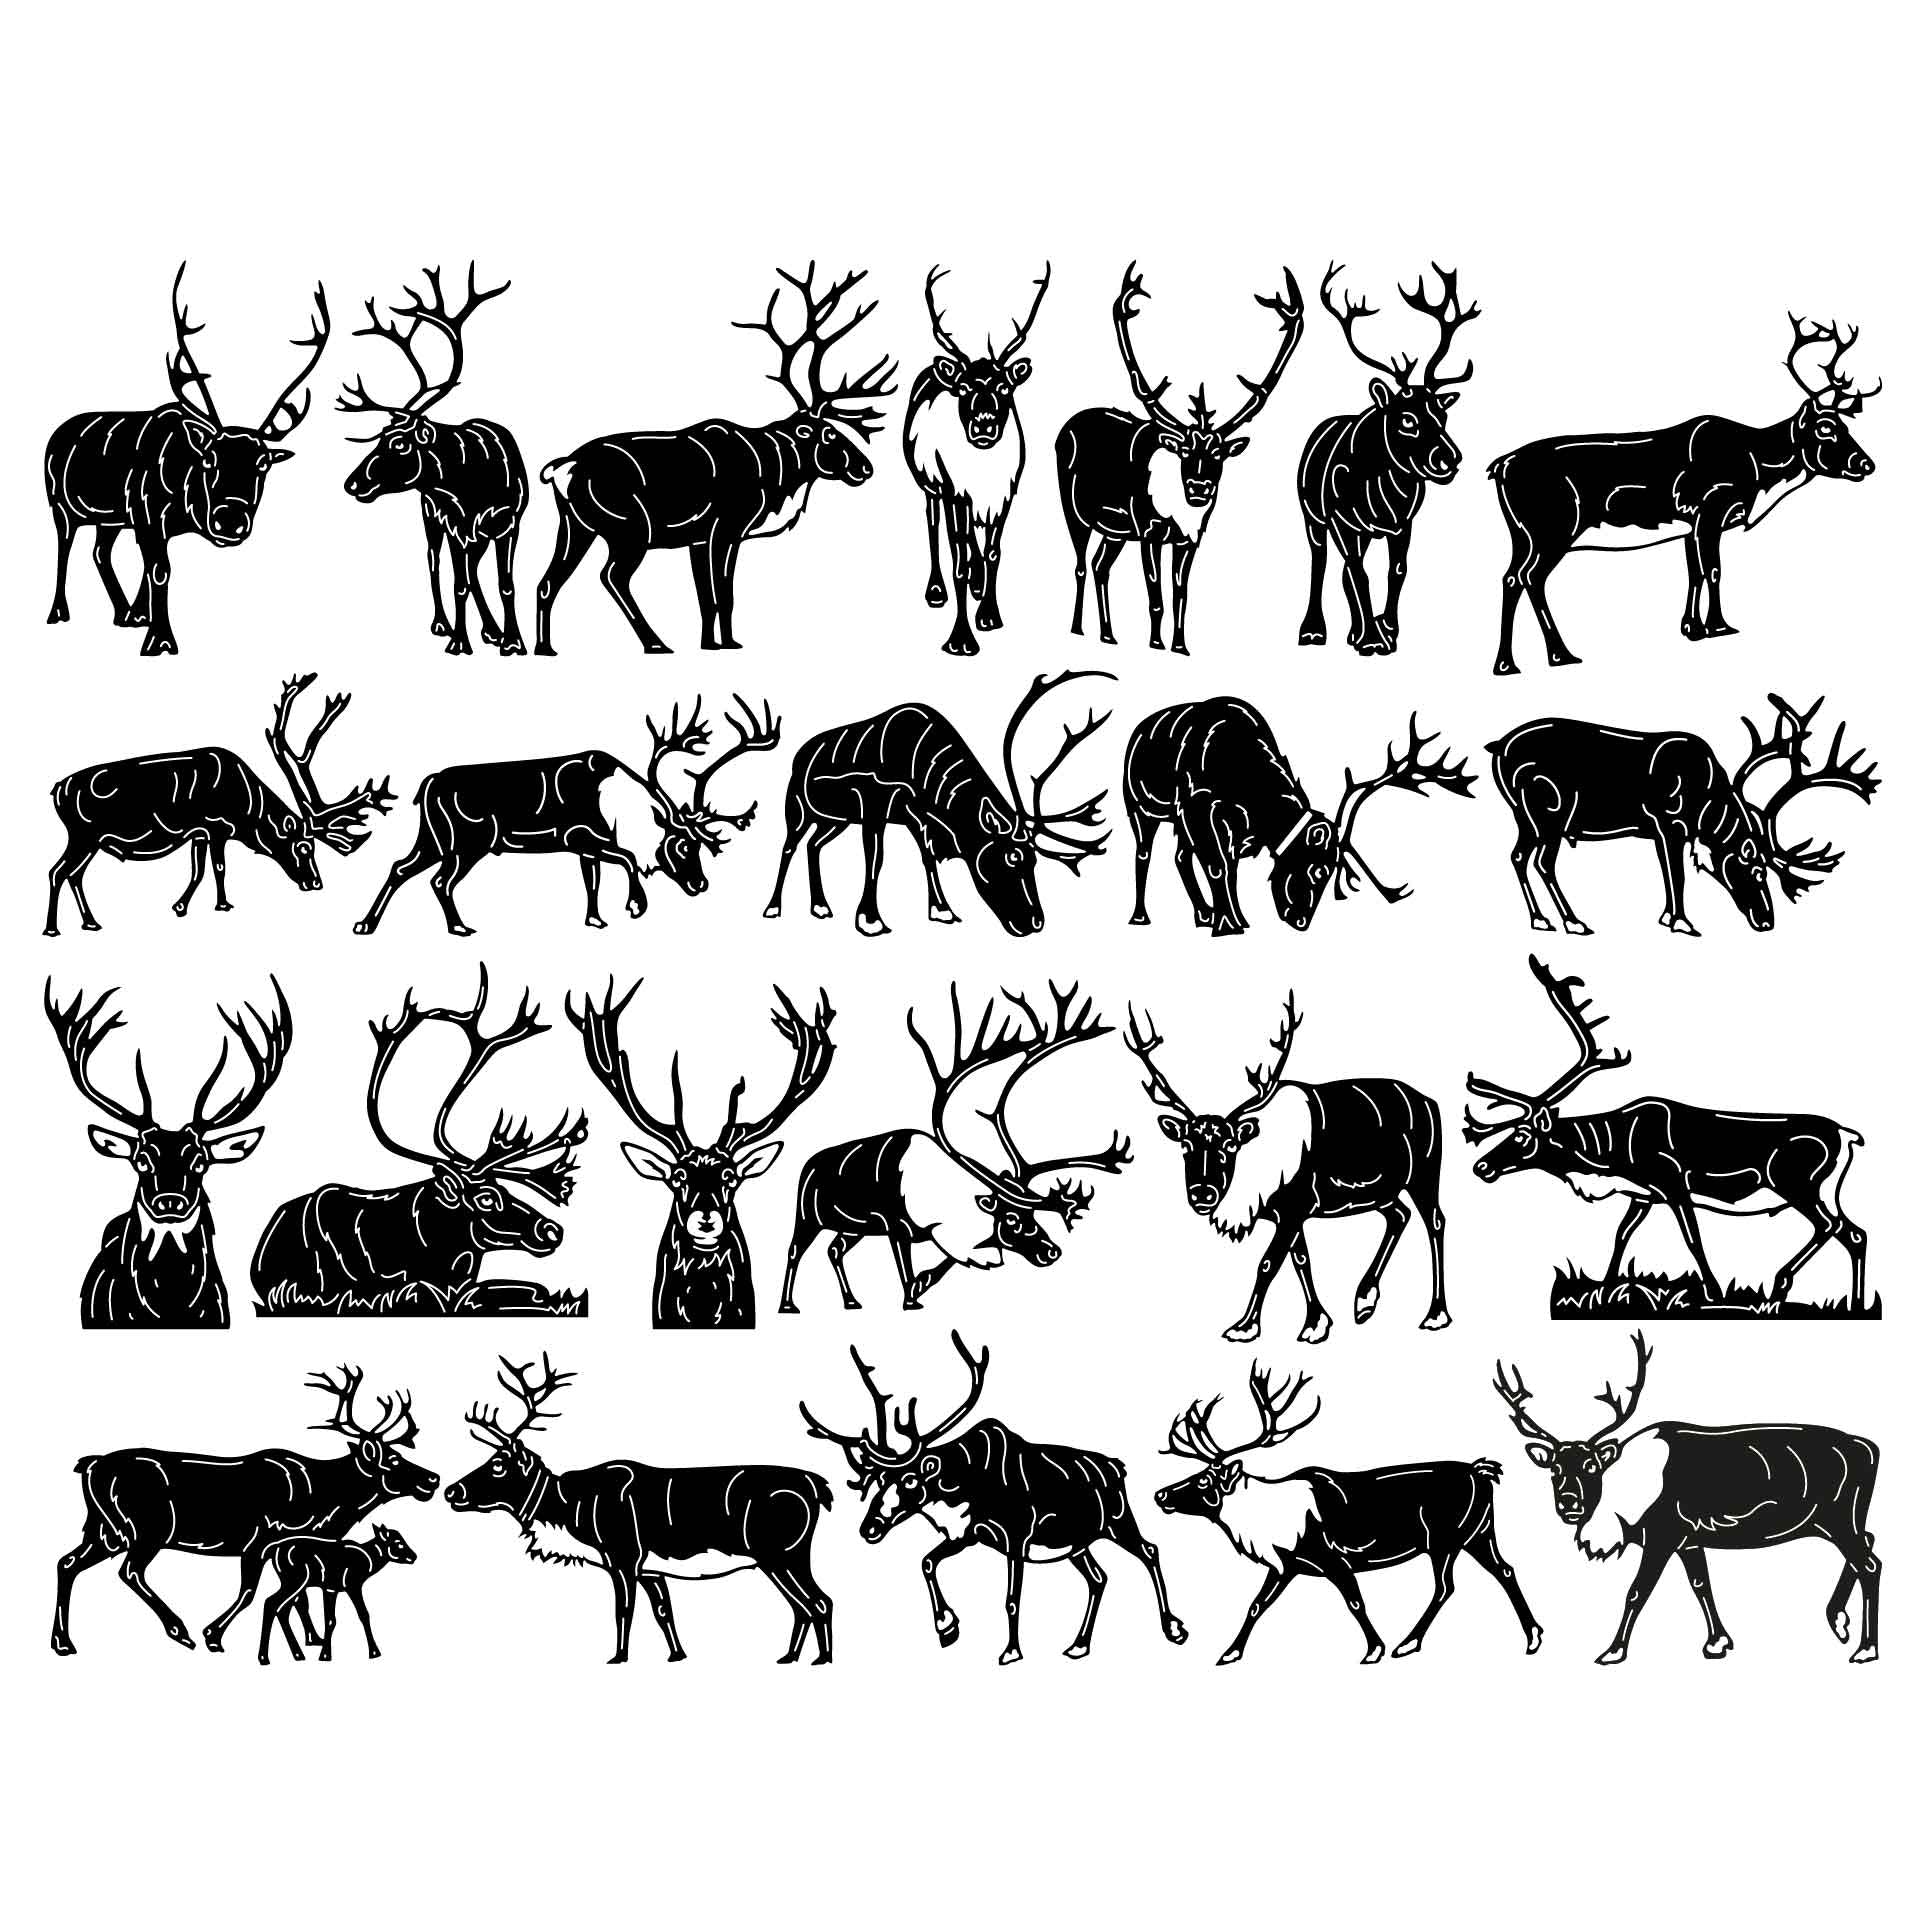 Reindeer or American Caribou-DXF files Cut Ready for CNC-DXFforCNC.com